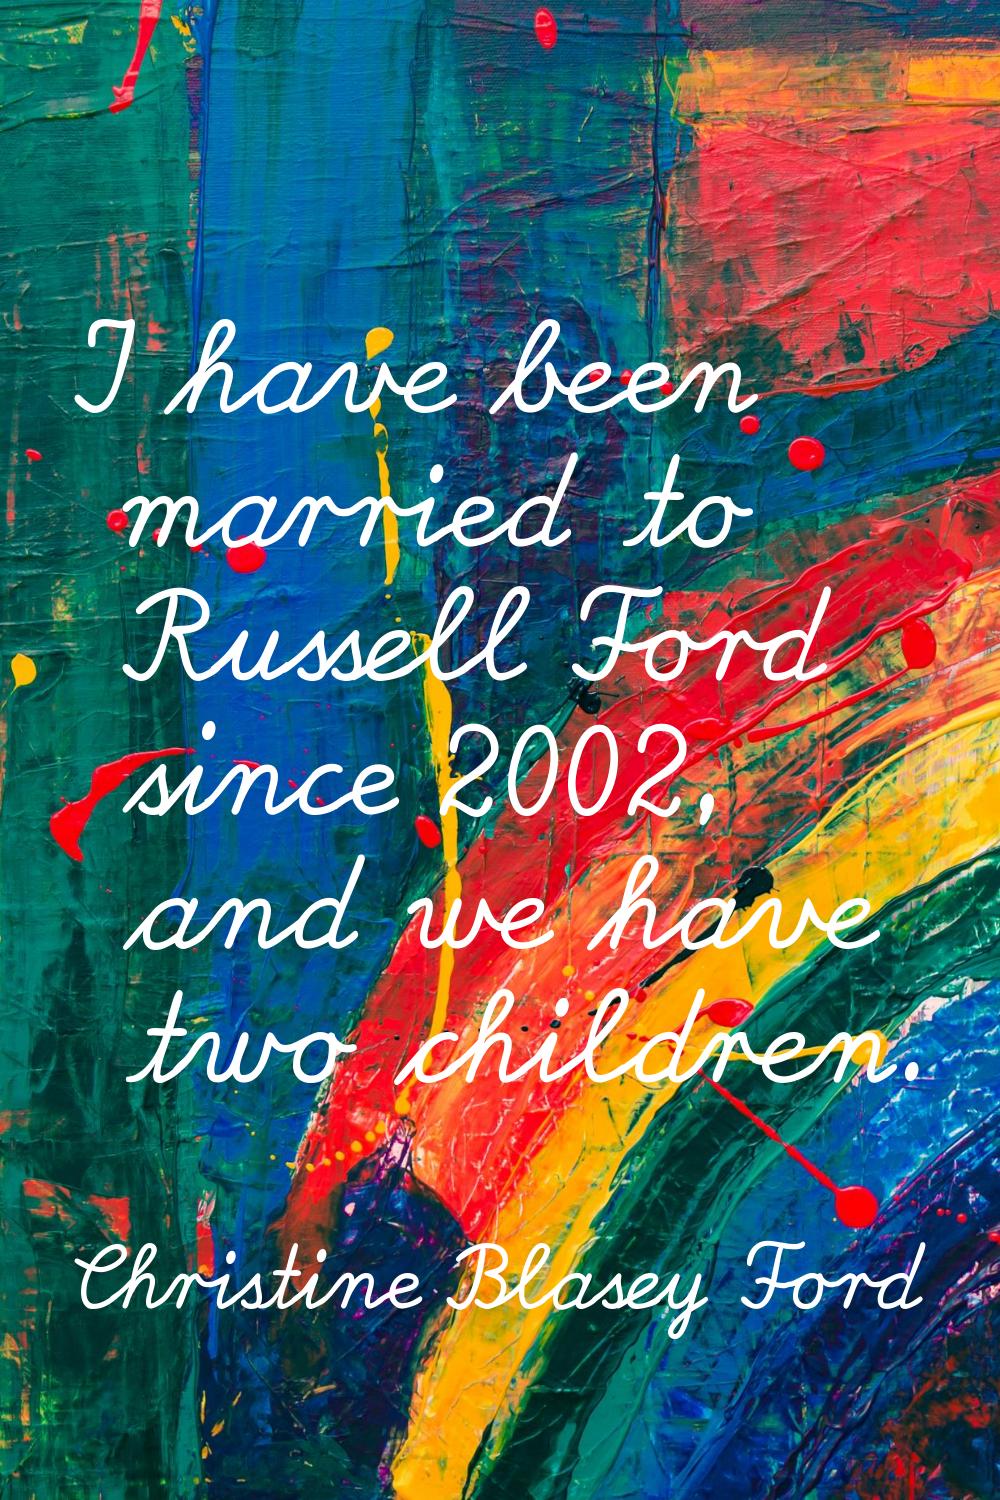 I have been married to Russell Ford since 2002, and we have two children.